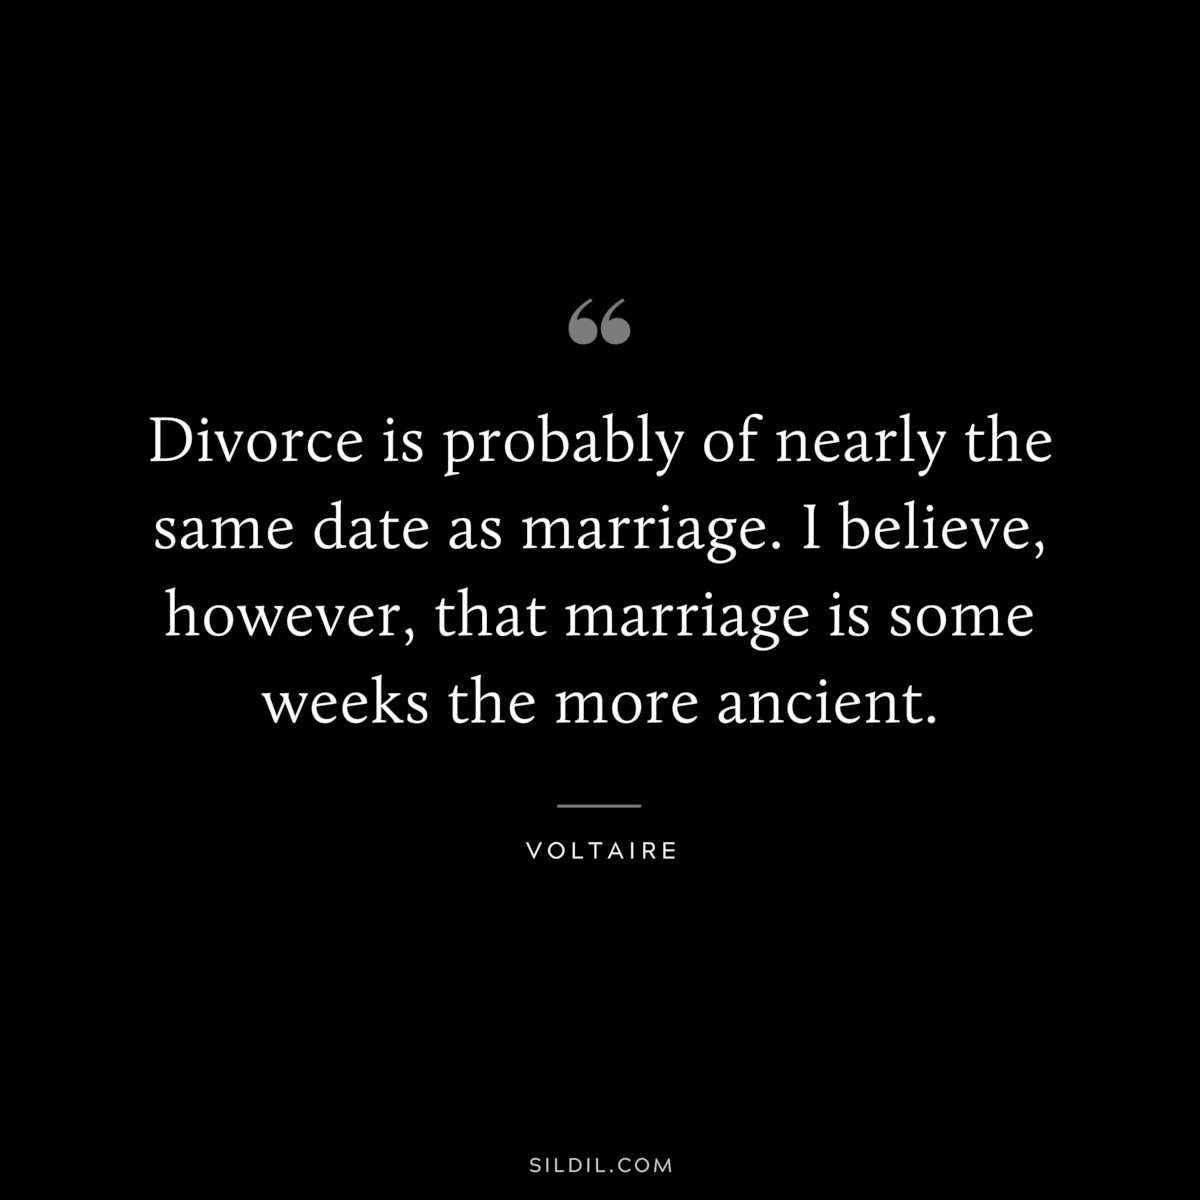 Divorce is probably of nearly the same date as marriage. I believe, however, that marriage is some weeks the more ancient. ― Voltaire